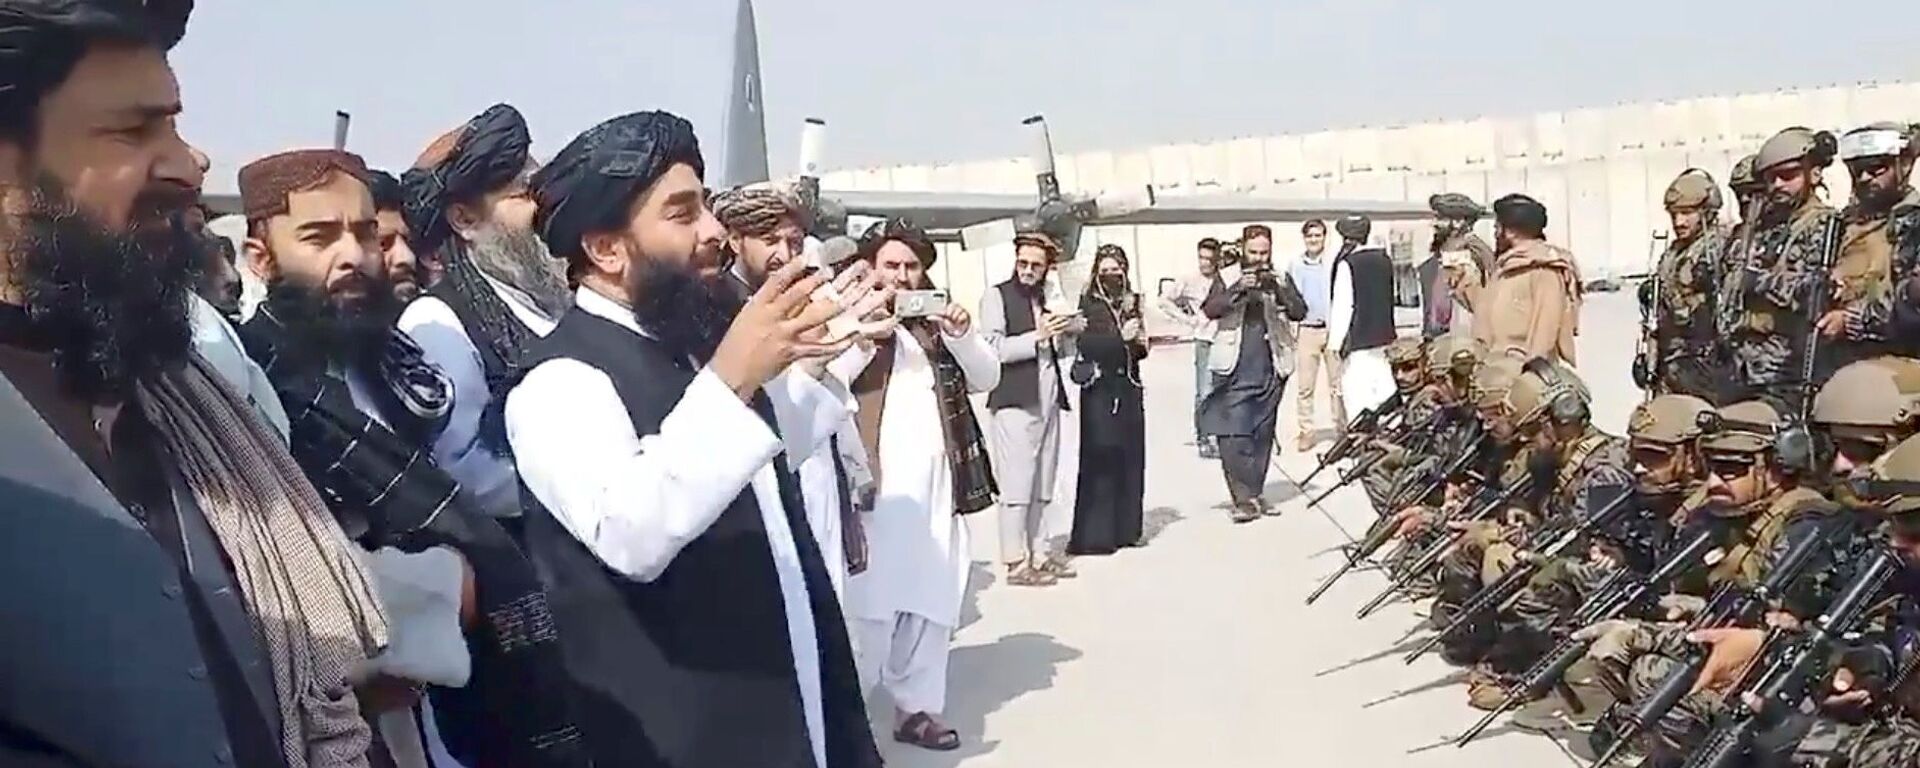 Taliban spokesman Zabihullah Mujahid speaks to Badri 313 military unit at Kabul's airport, Afghanistan August 31, 2021 in this still image obtained from a handout video.  Taliban/Handout via REUTERS   ATTENTION EDITORS - THIS IMAGE HAS BEEN SUPPLIED BY A THIRD PARTY. NO RESALES. NO ARCHIVES.  - Sputnik International, 1920, 01.09.2021